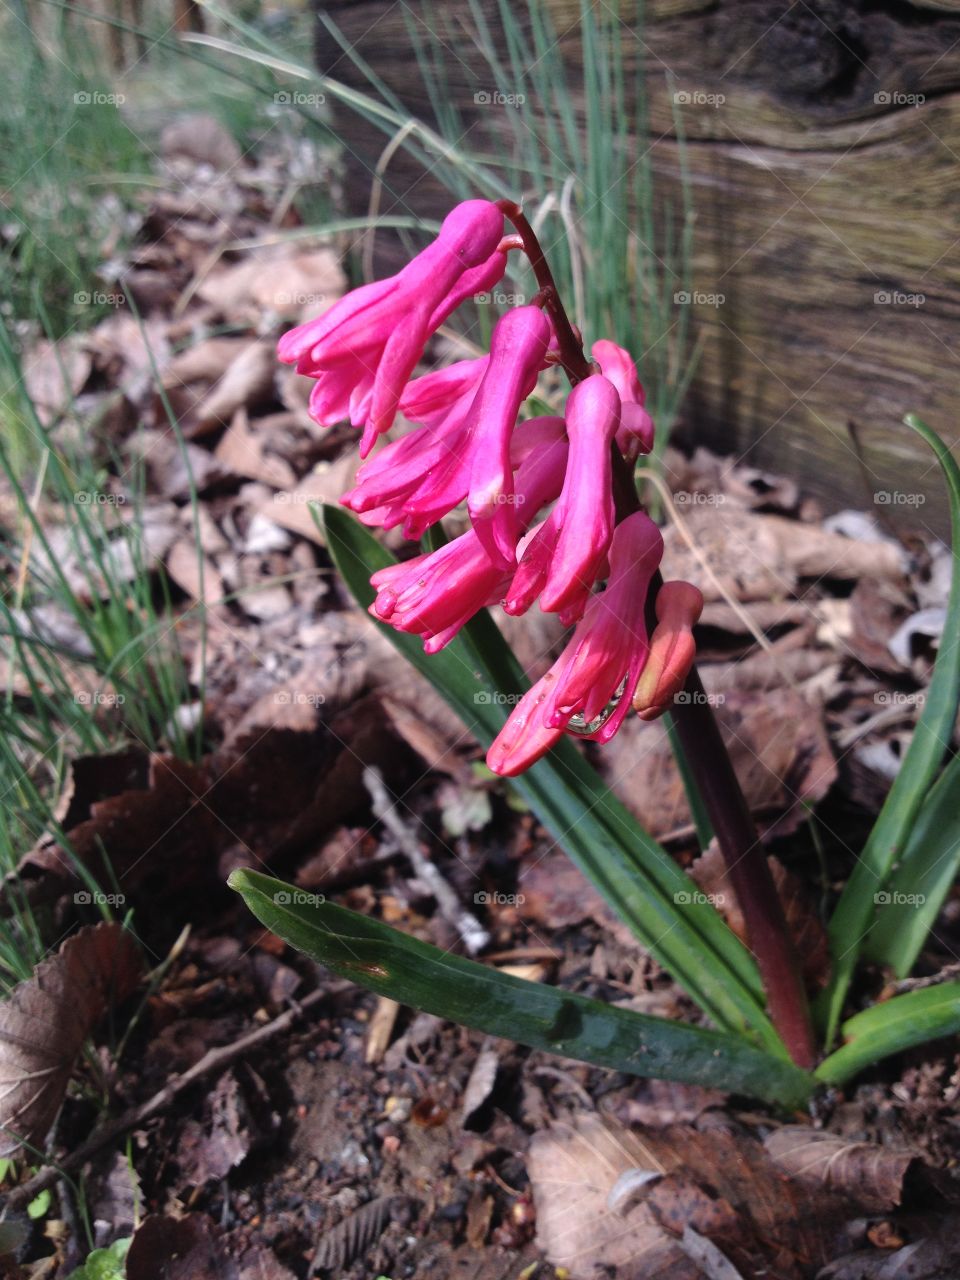 First flower of spring 